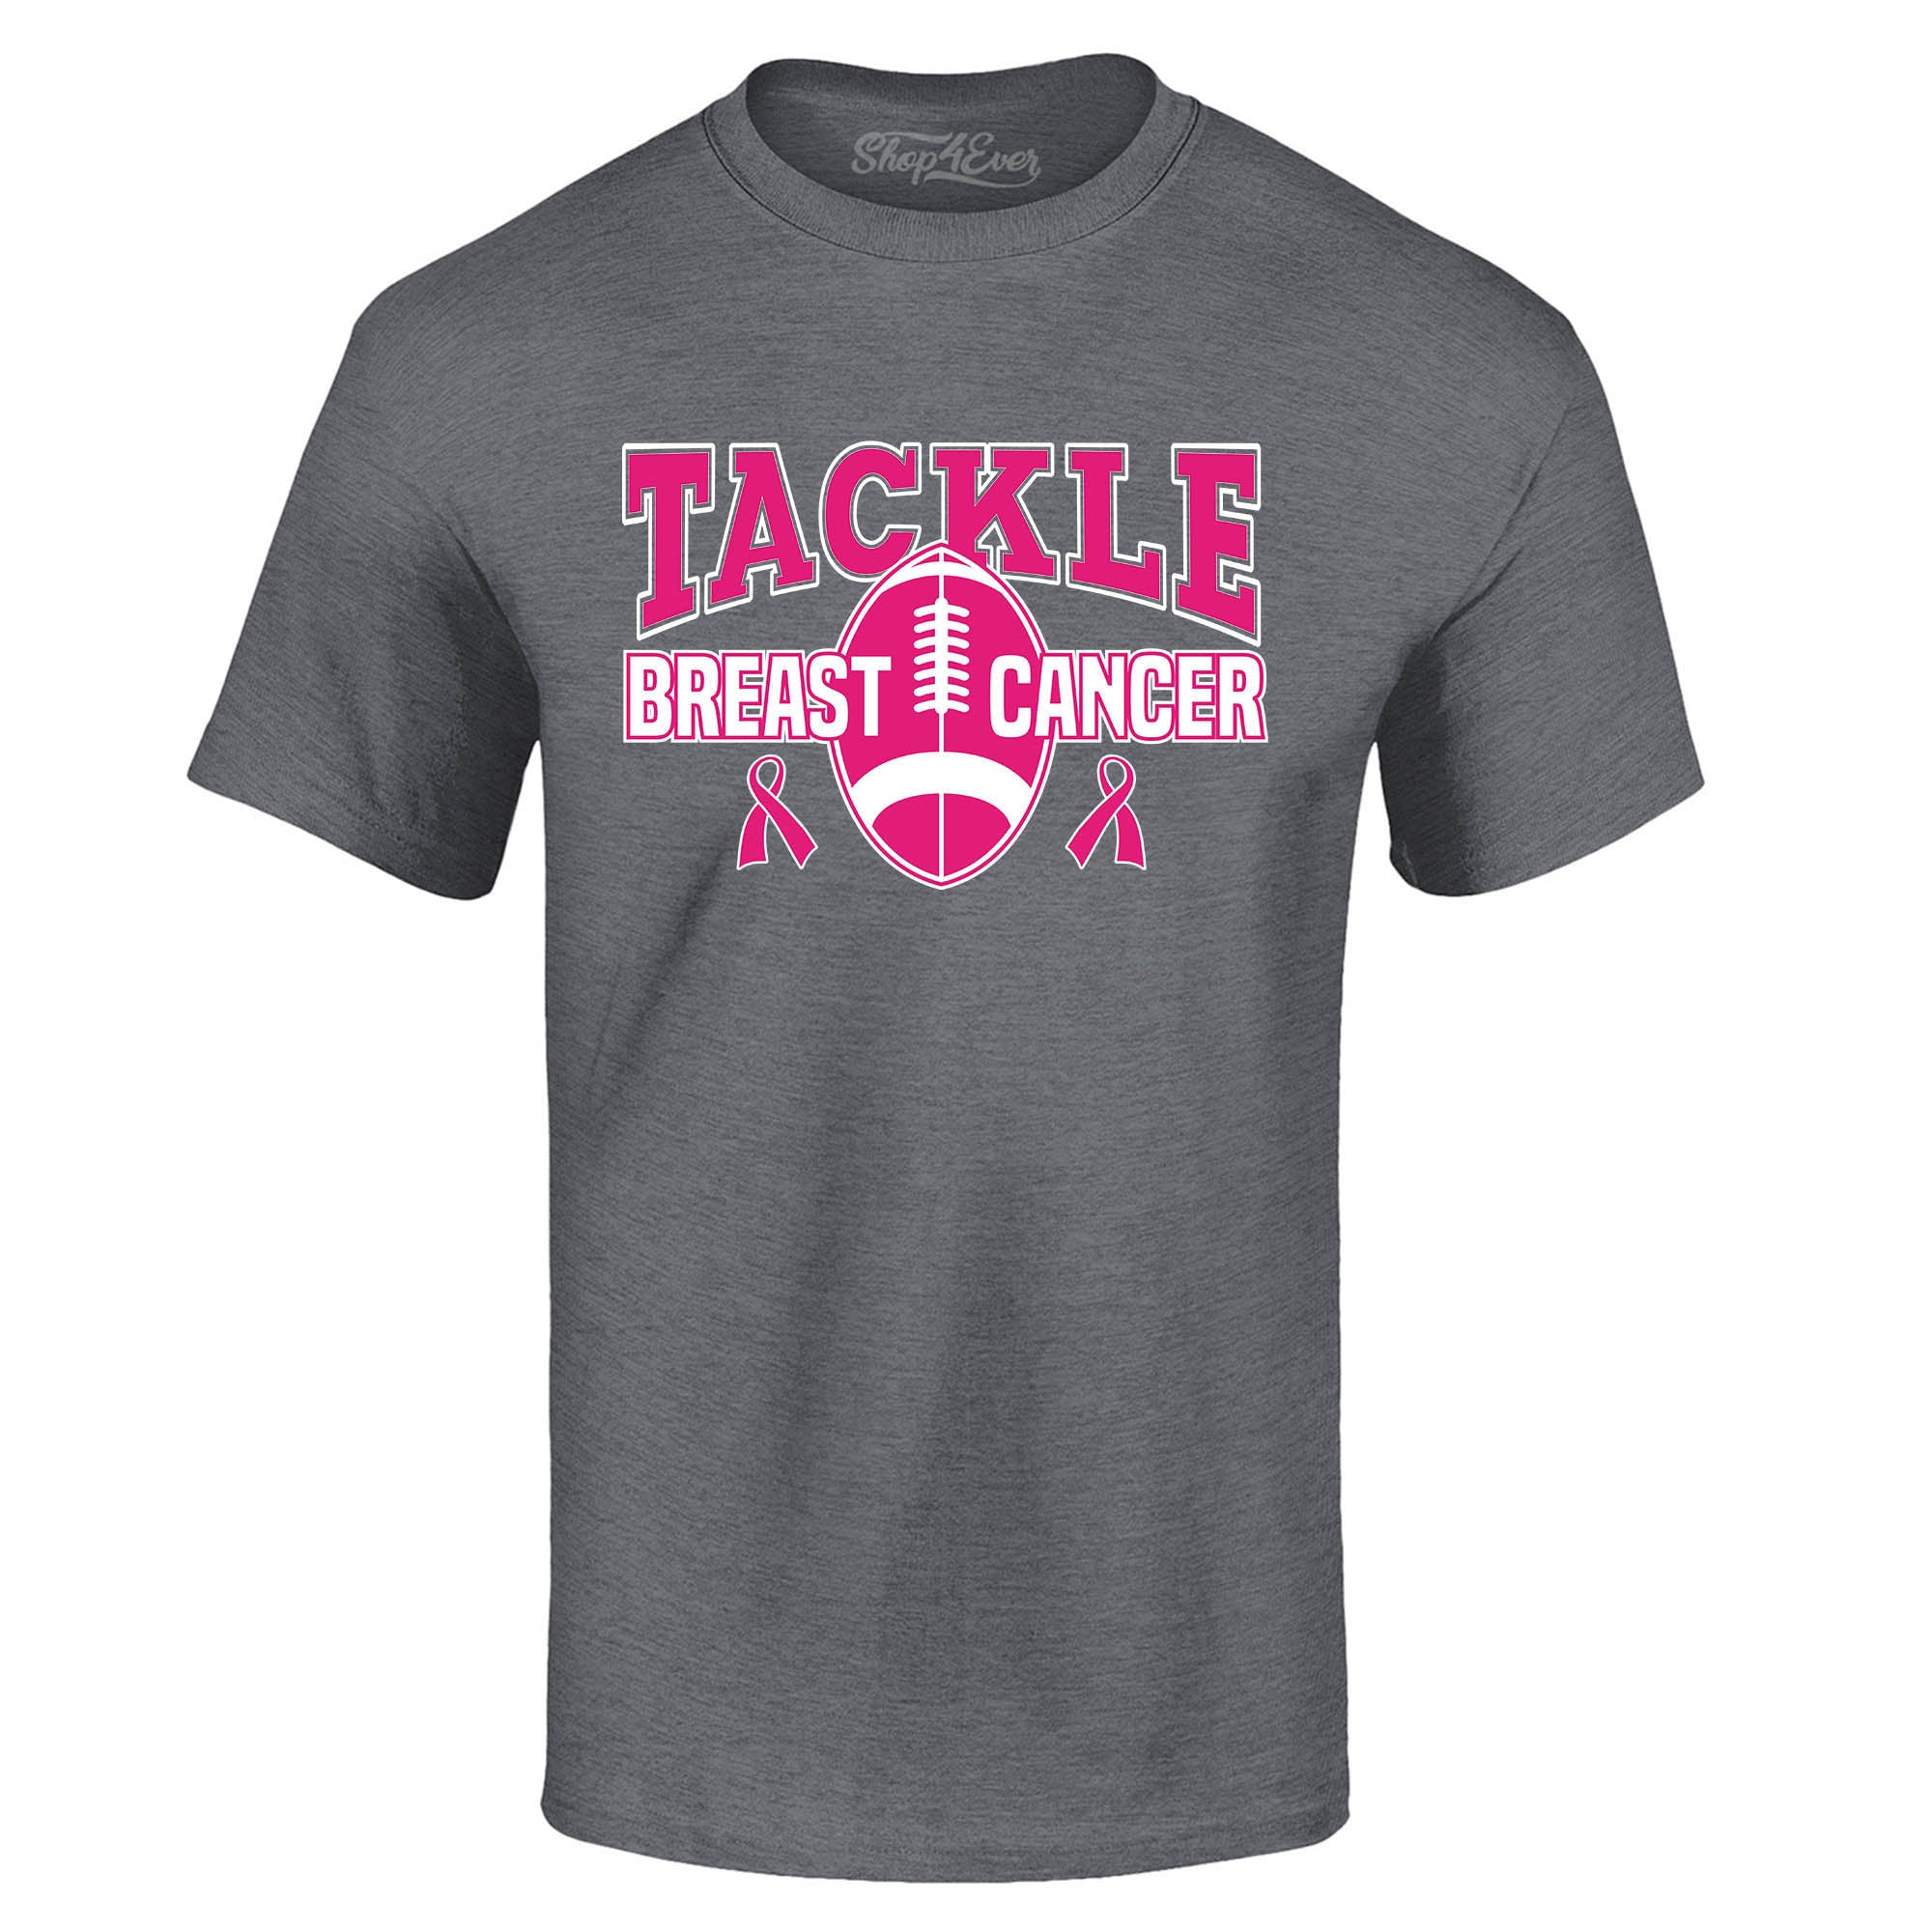 Tackle Breast Cancer Awareness T-Shirt Support